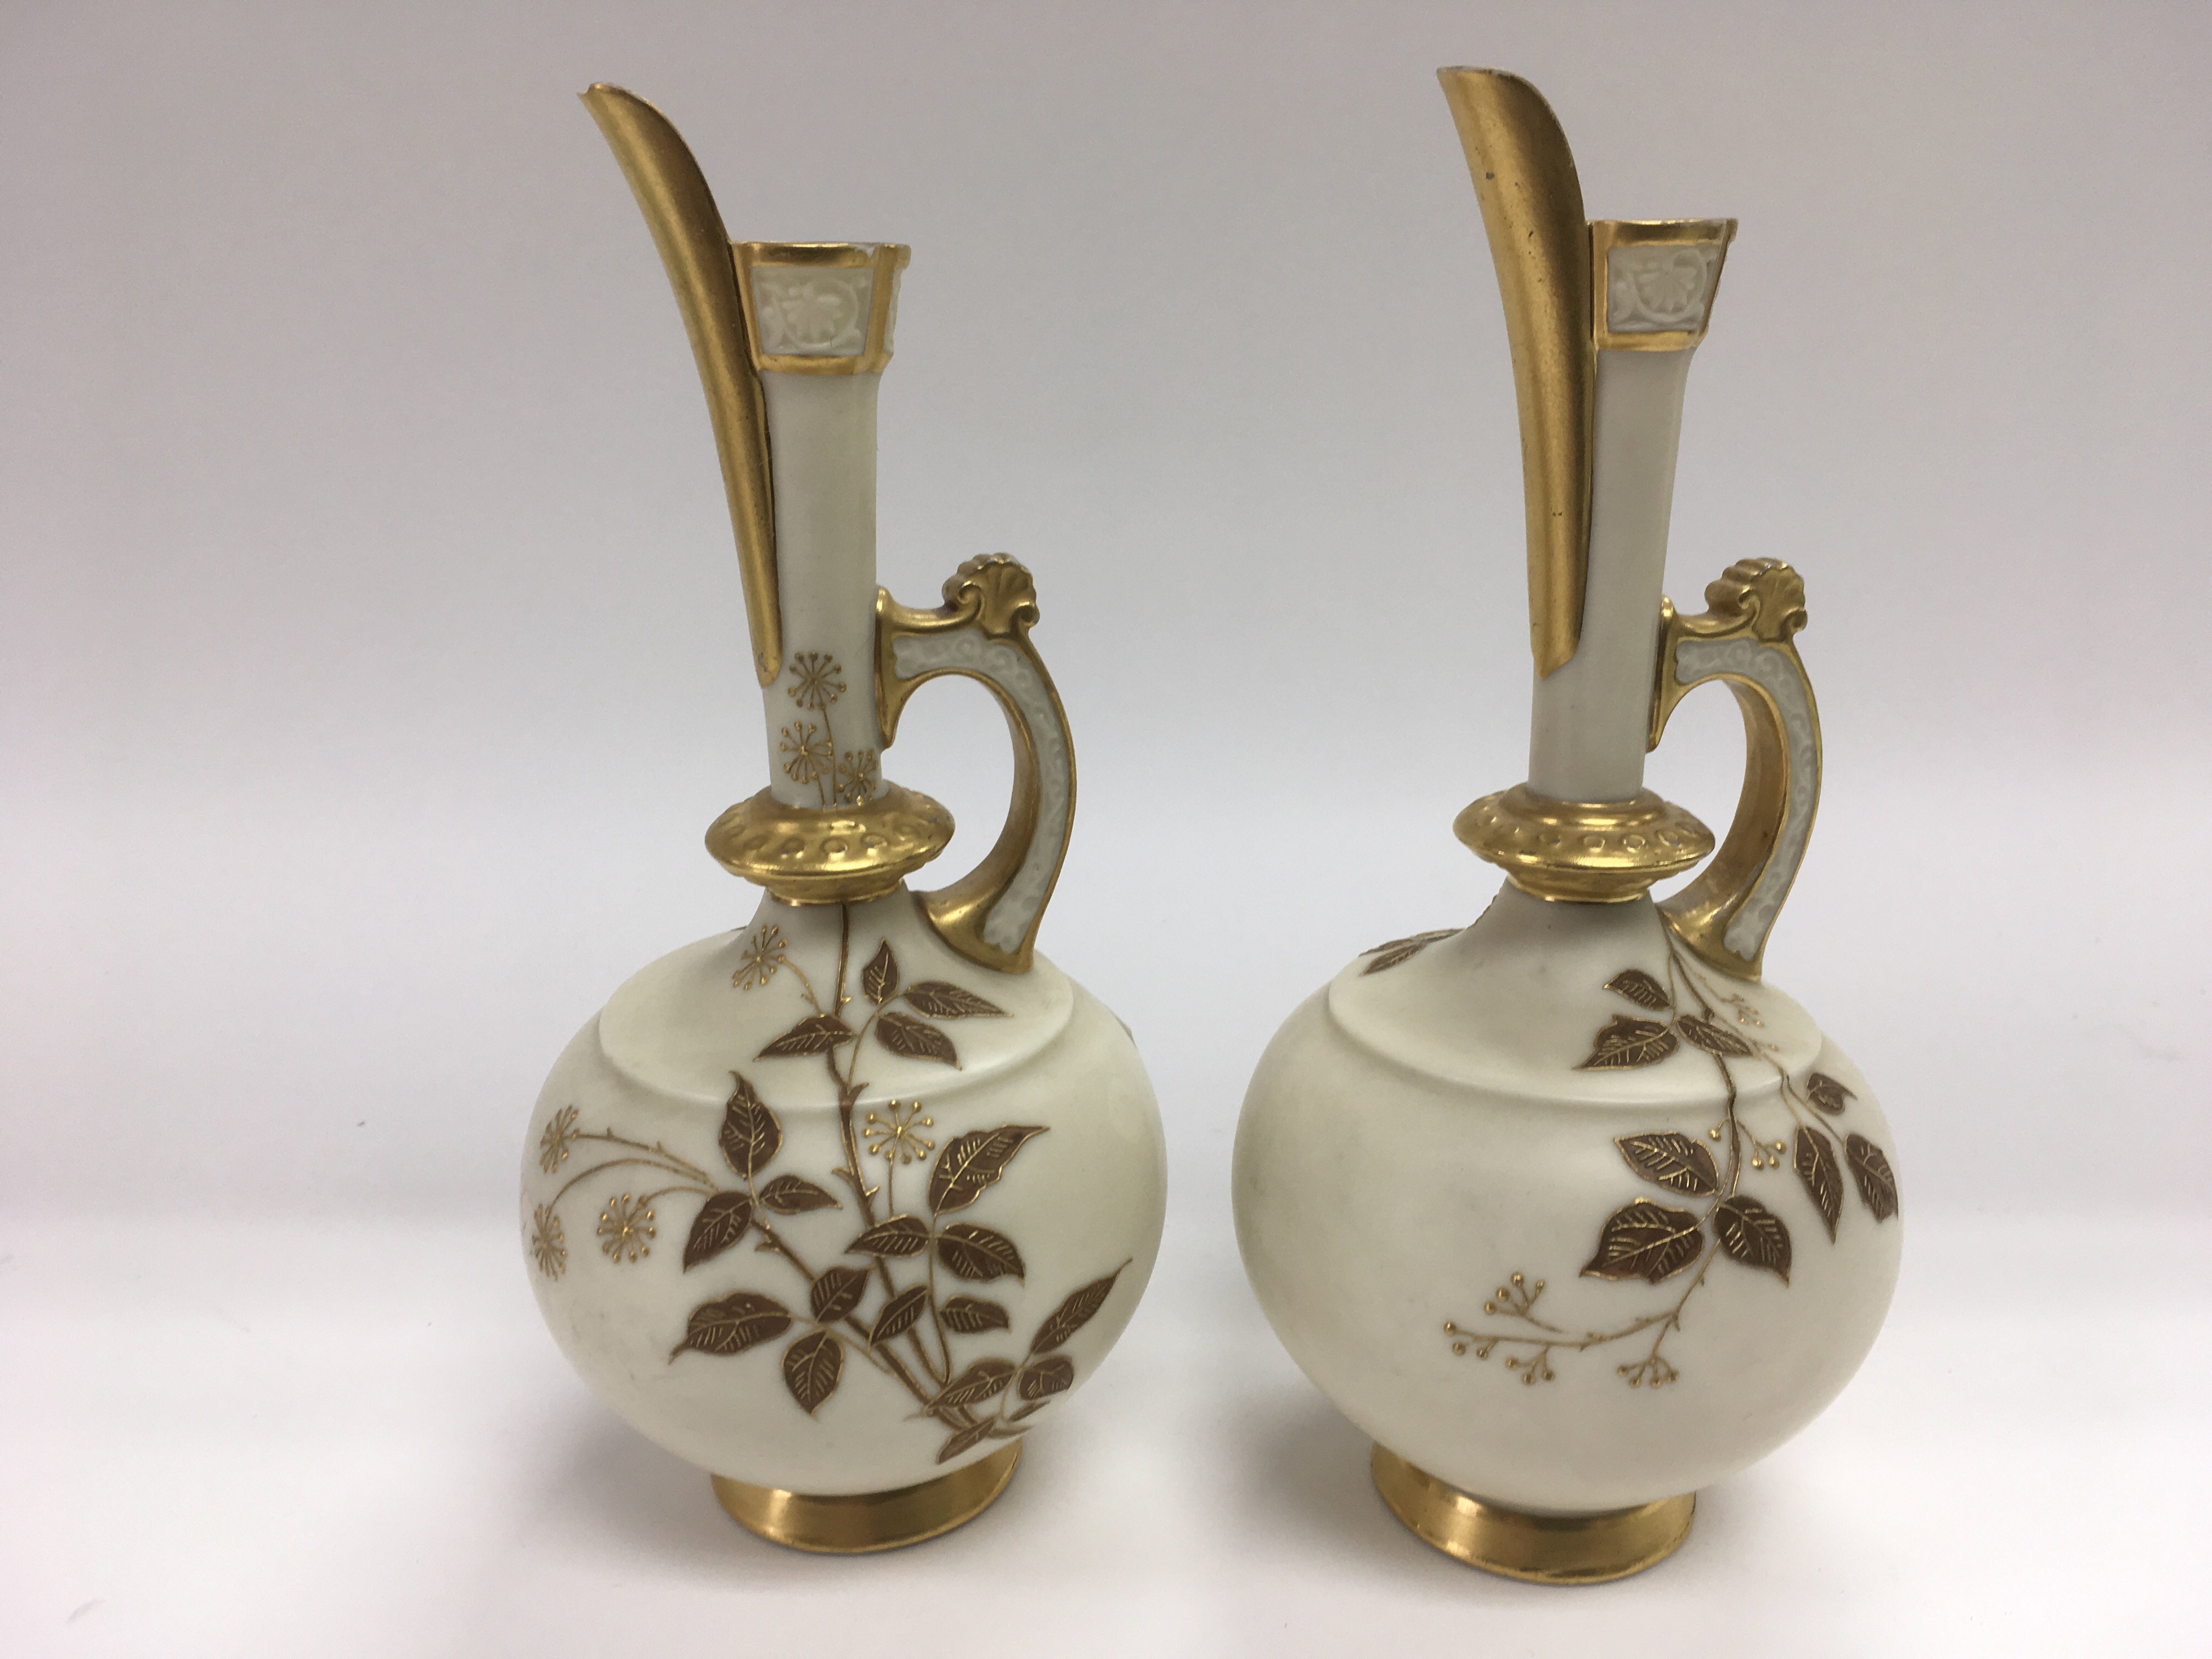 A pair of Royal Worcester jugs with giltwork decor